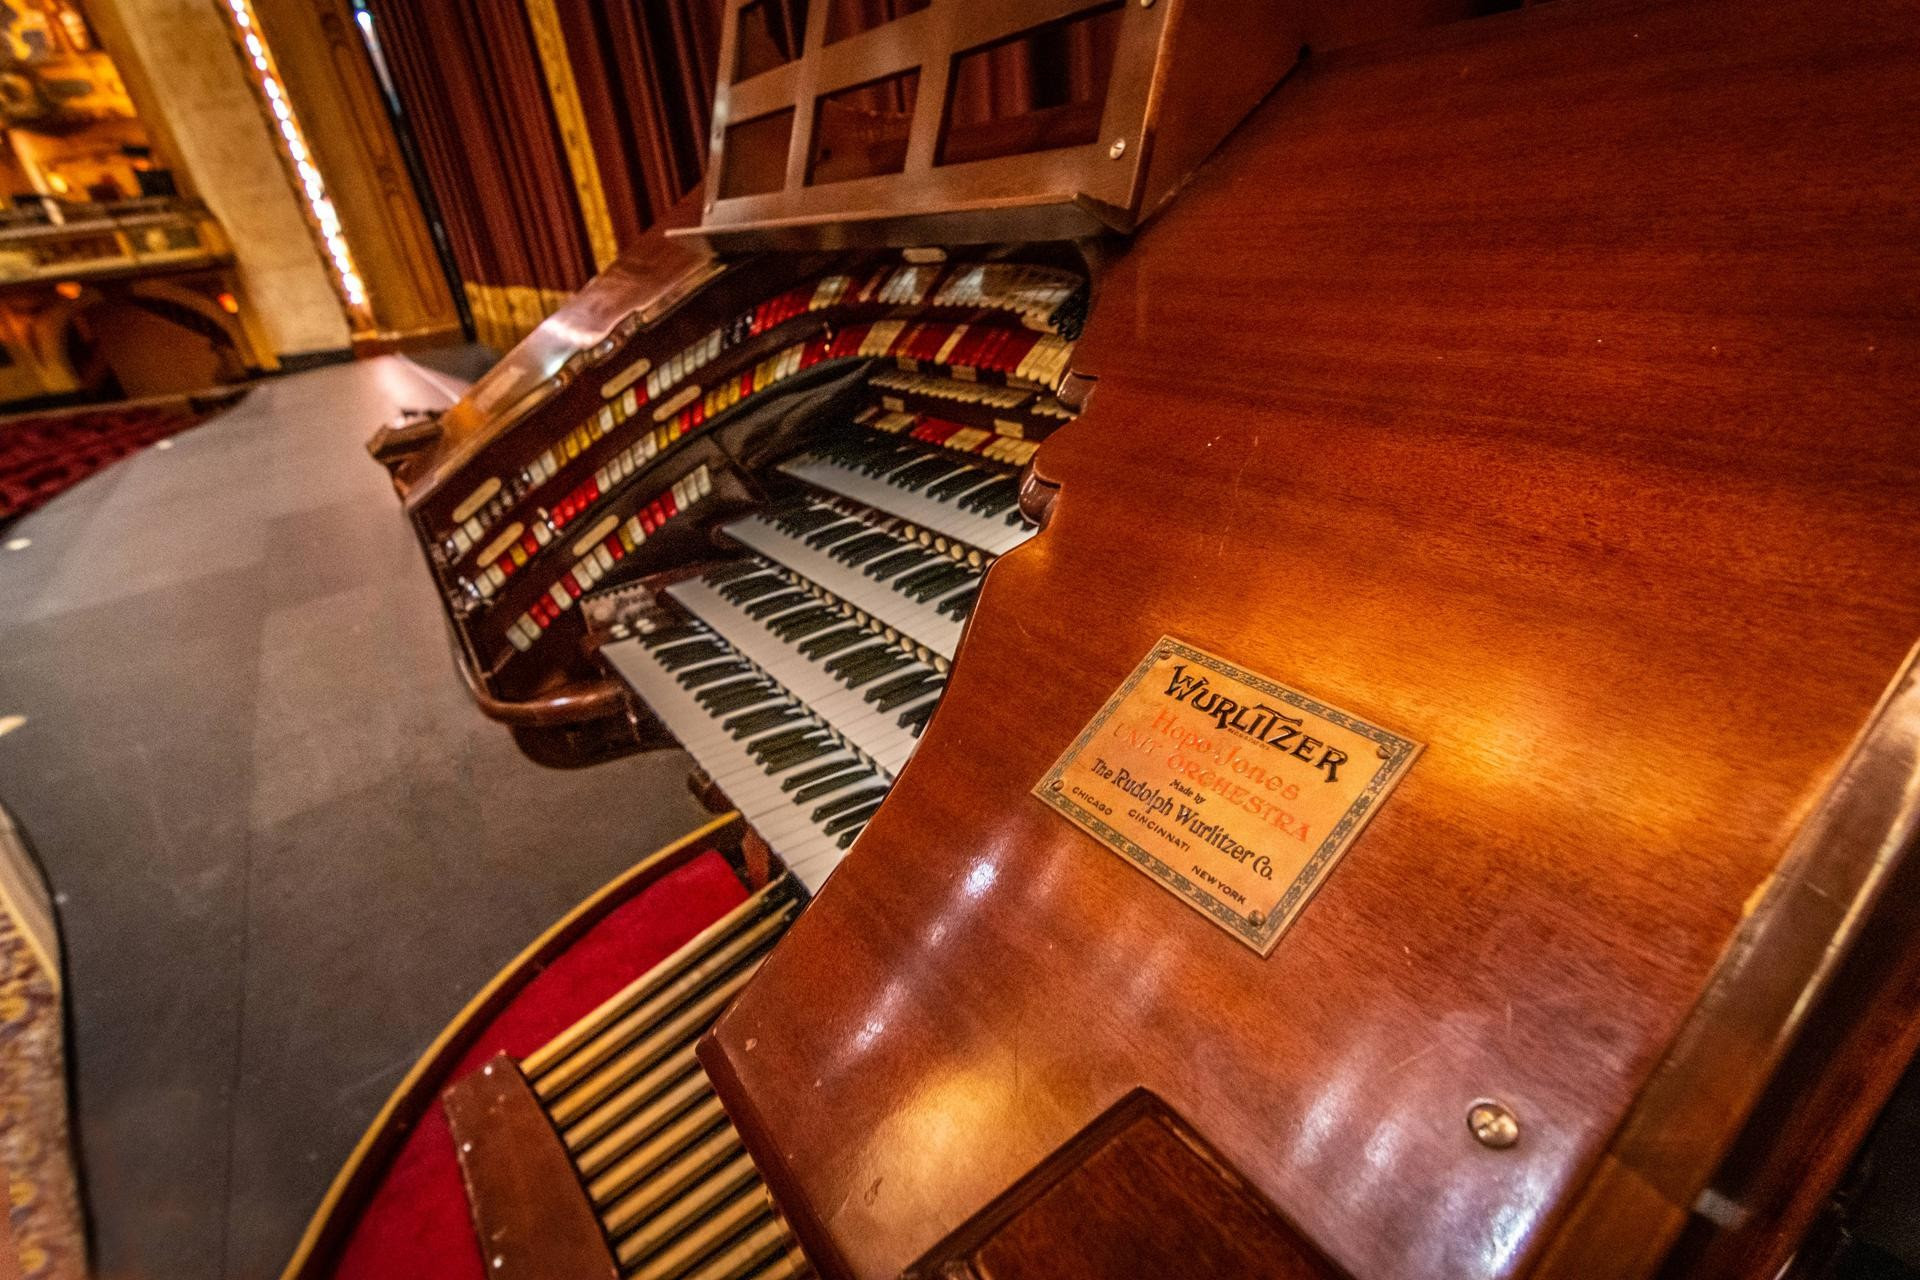 The Mighty Wurlitzer Organ (Photo by Tom Burns/courtesy of Shea's Performing Arts Center)